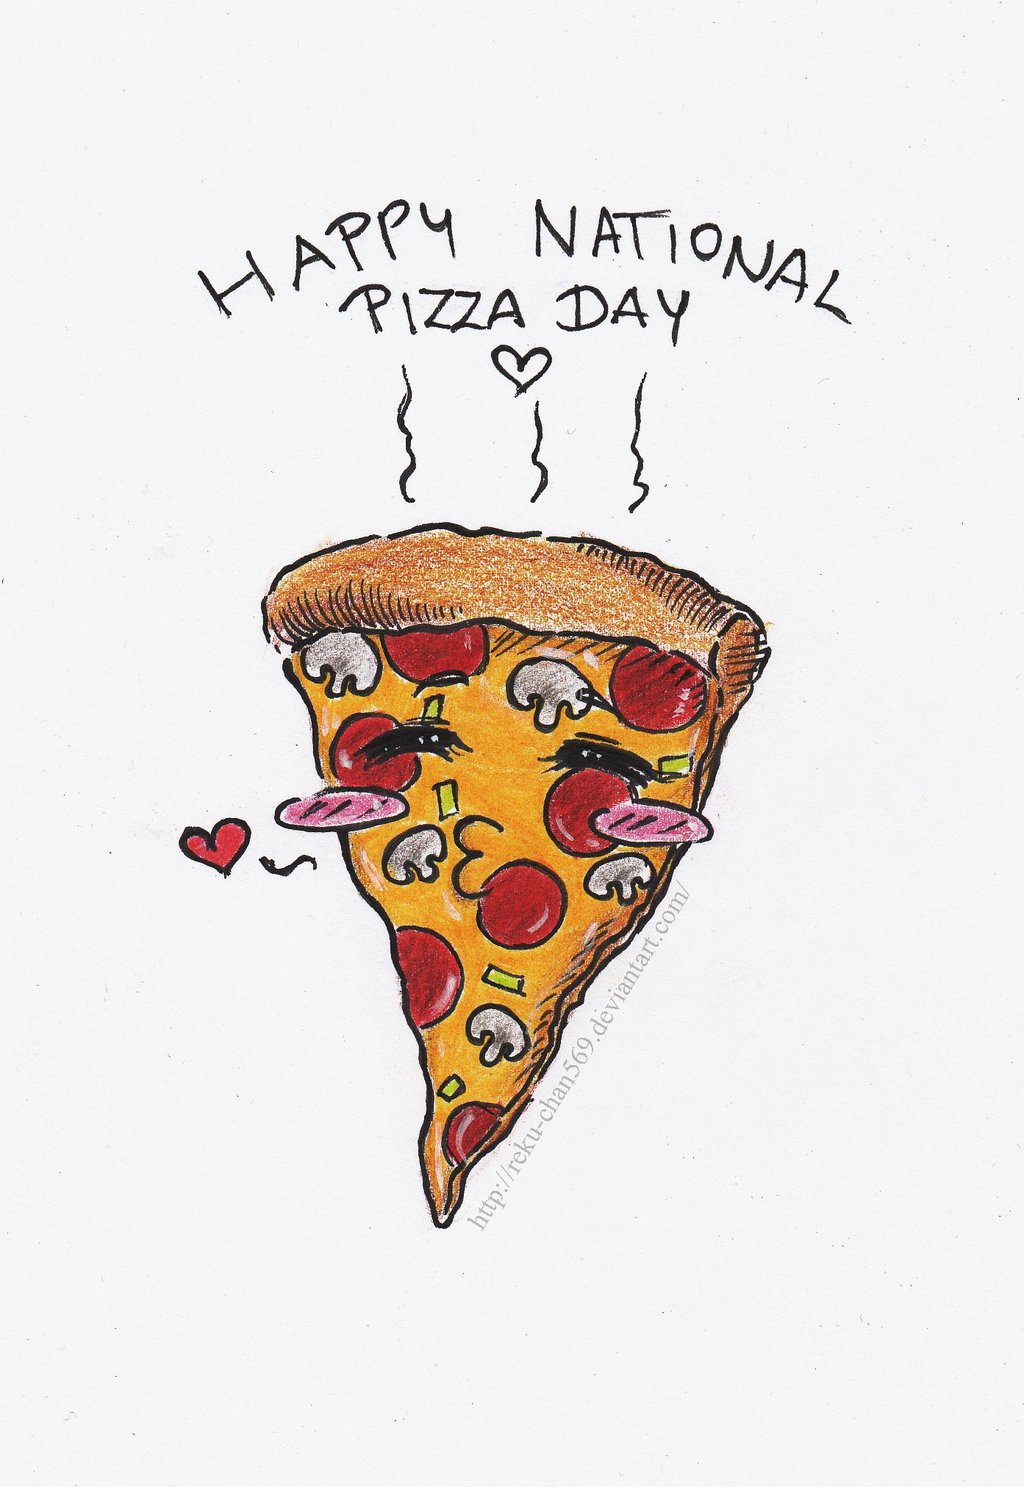 Happy National Pizza Day by Reku chan569 on